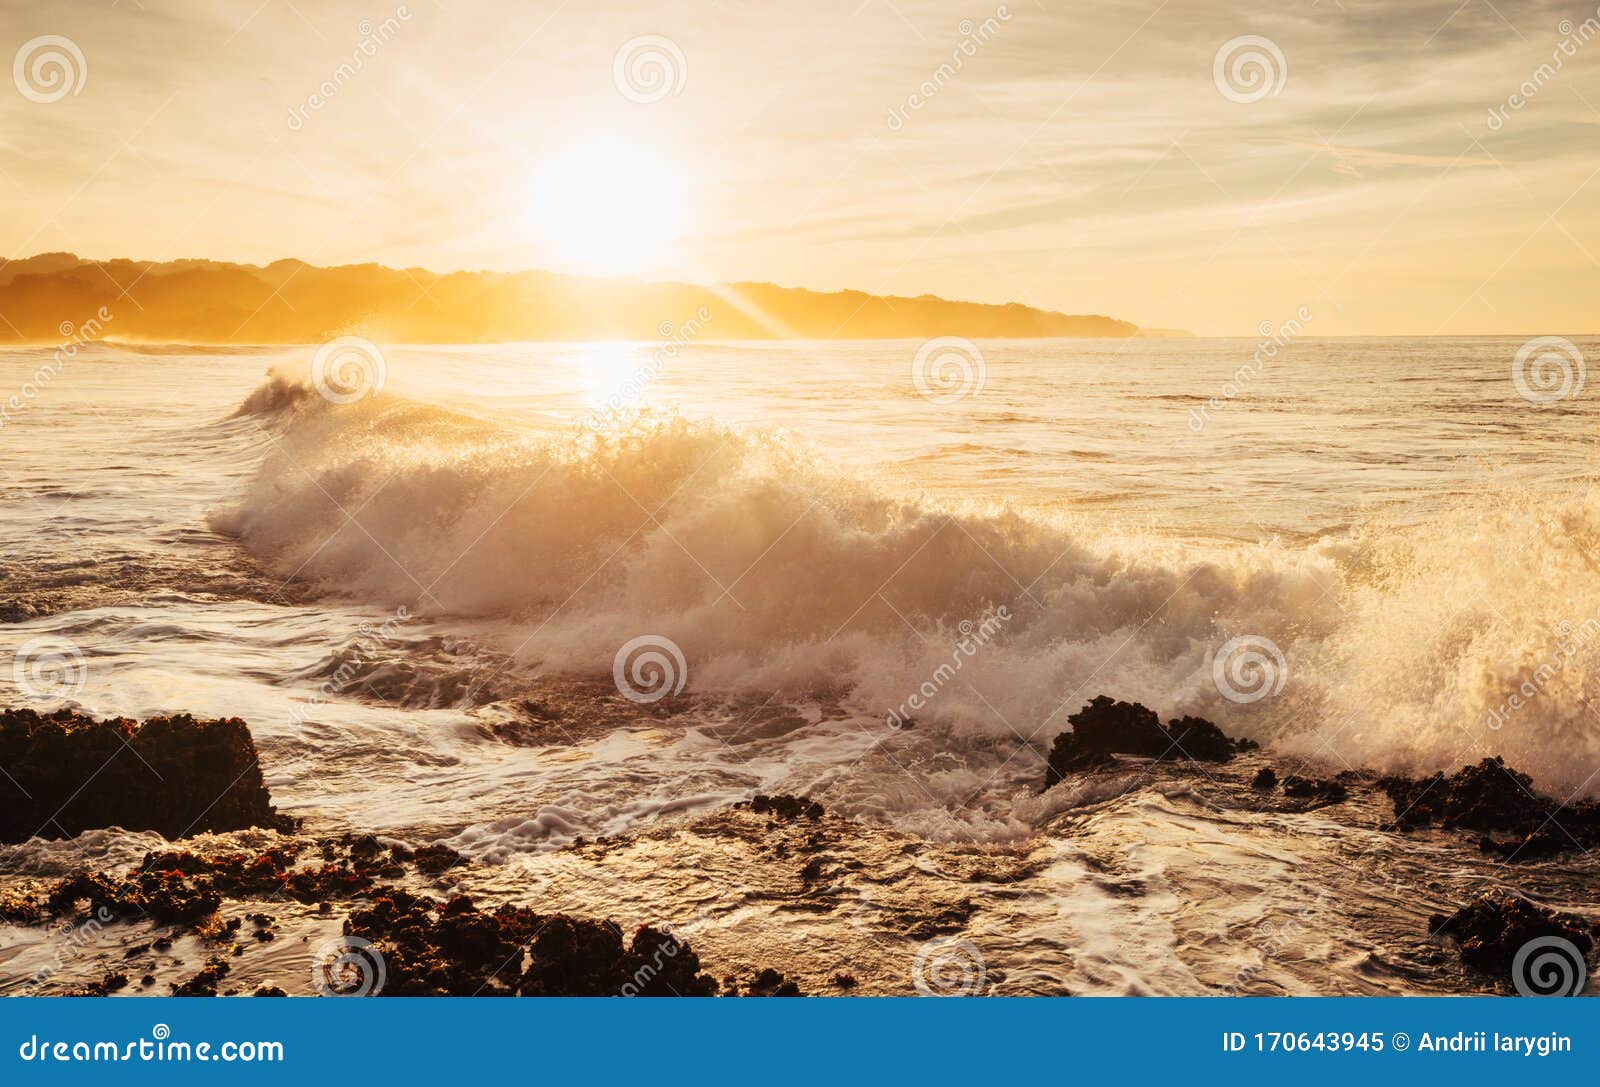 Sunset Beach Landscape Wallpapers Stock Image Image Of Sunlight